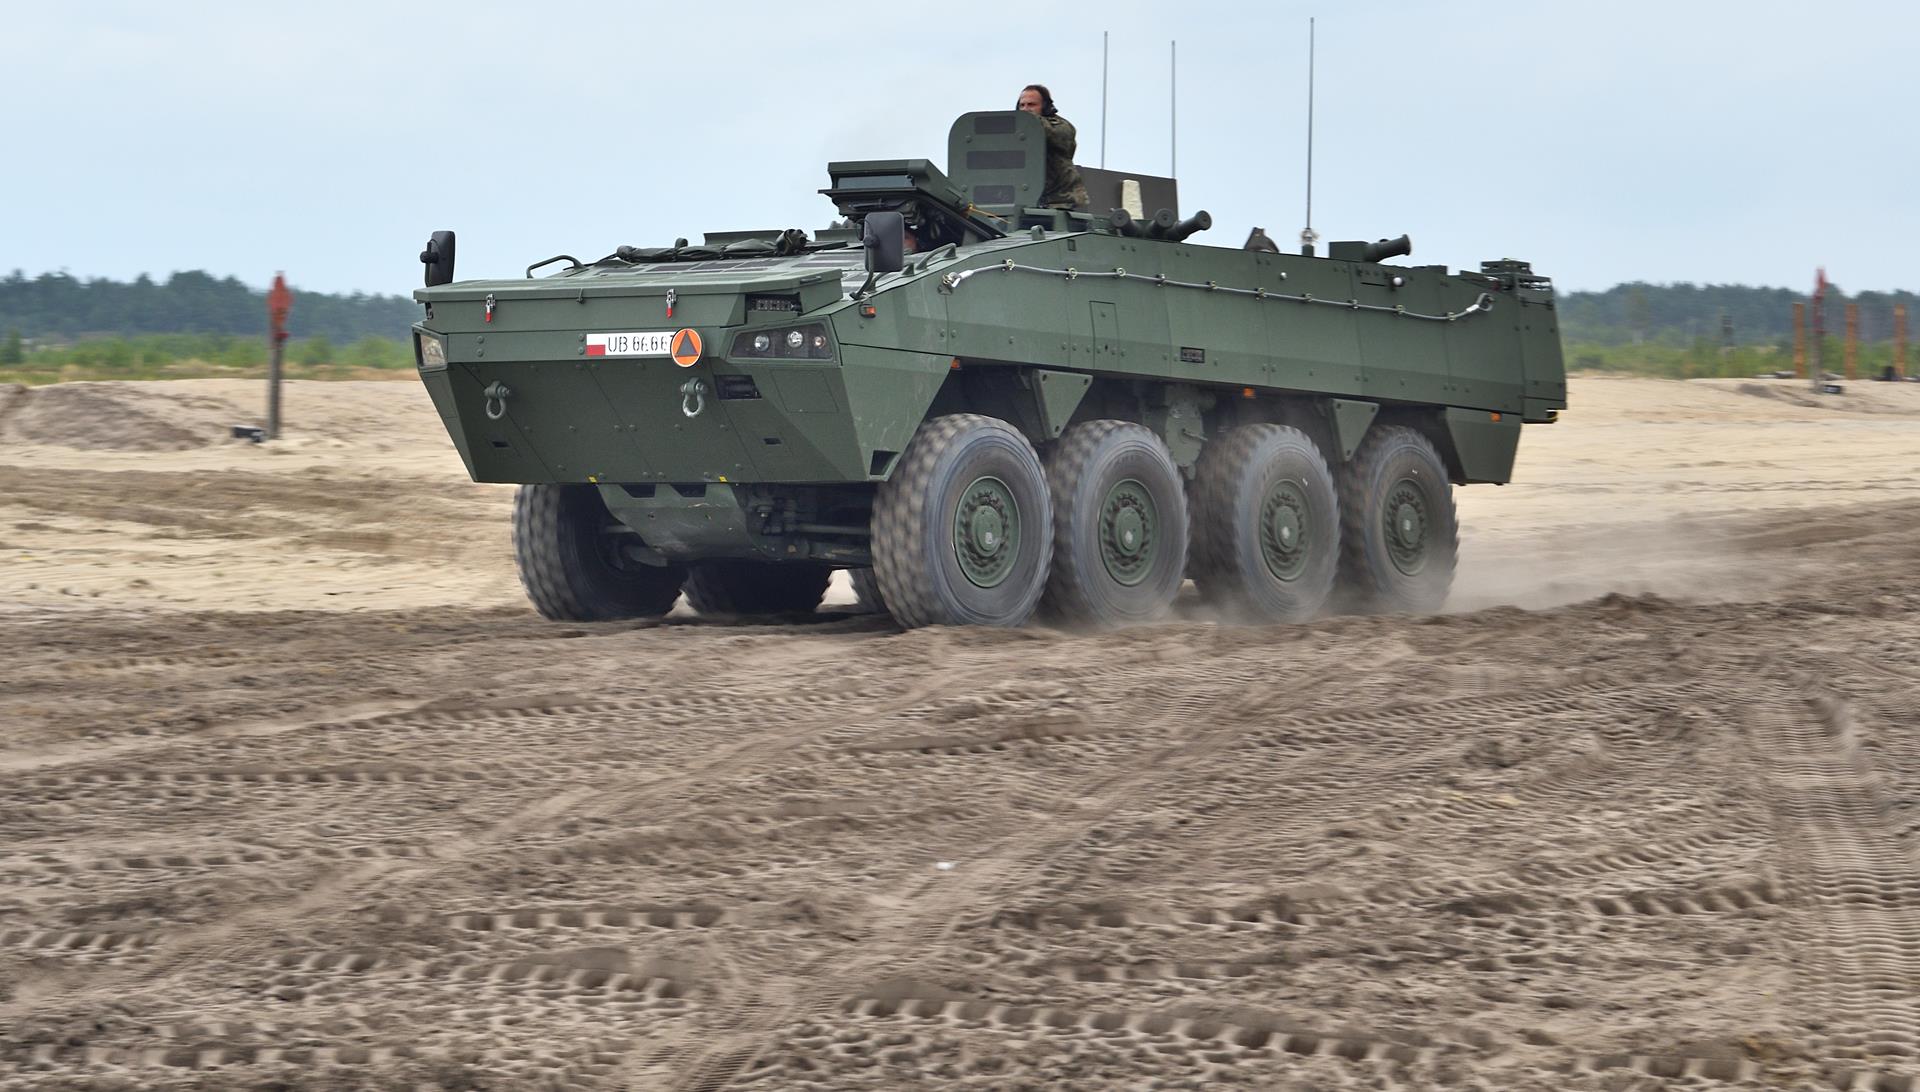 The new Rosomaks for the Polish Army are two more command vehicles